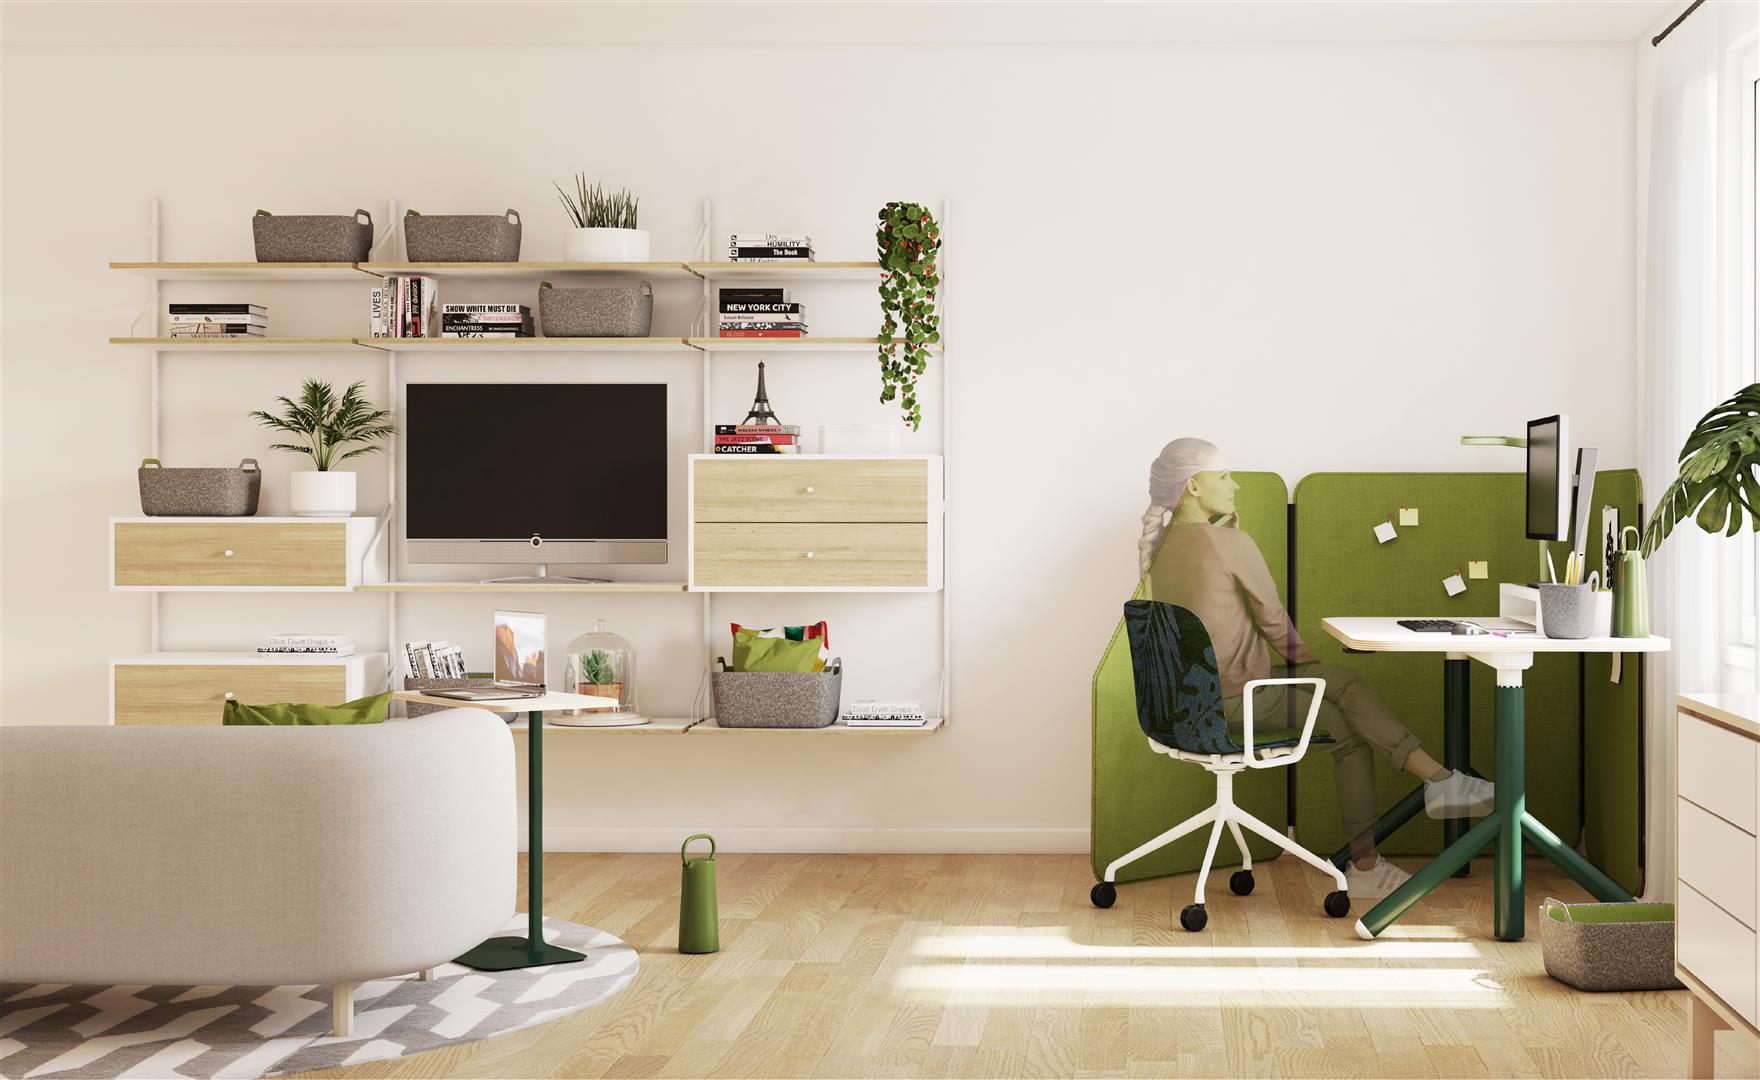 A height-adjustable desk, mobile energy source and adequate support for working on a sofa encourage a dynamic environment where users can opt between a wide range of working positions.